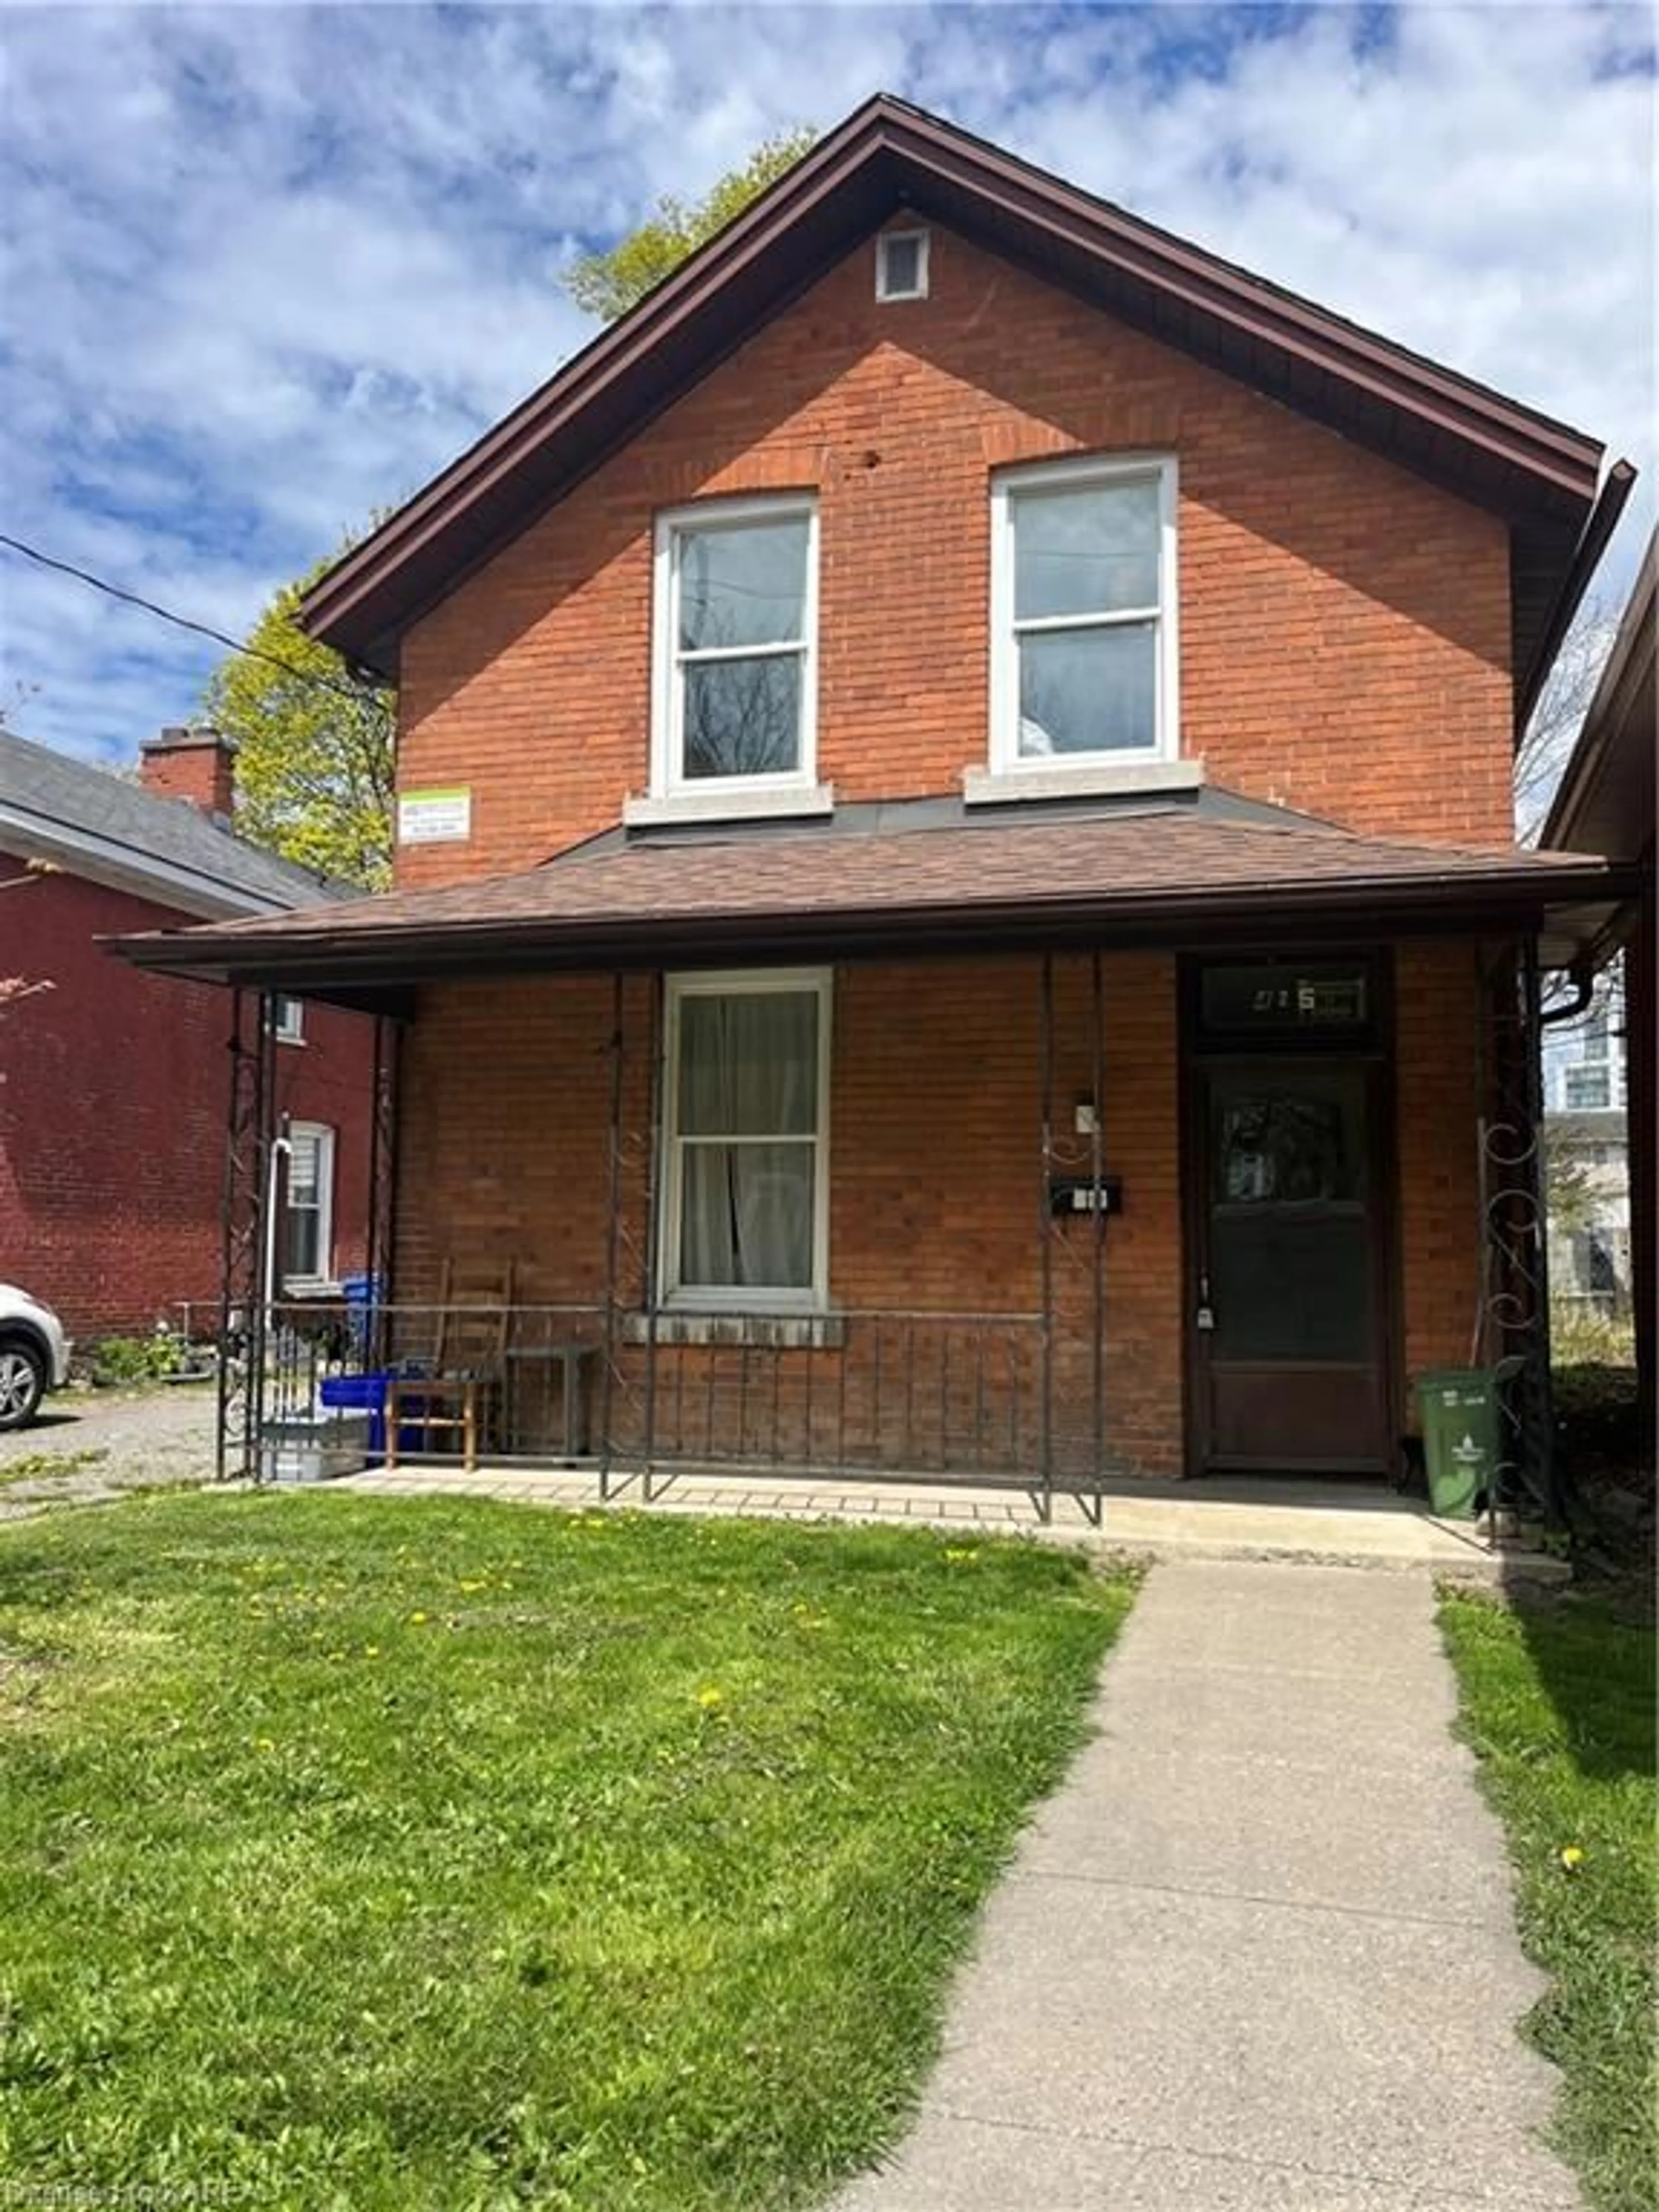 Home with brick exterior material for 425 Brock St, Kingston Ontario K7L 1T5